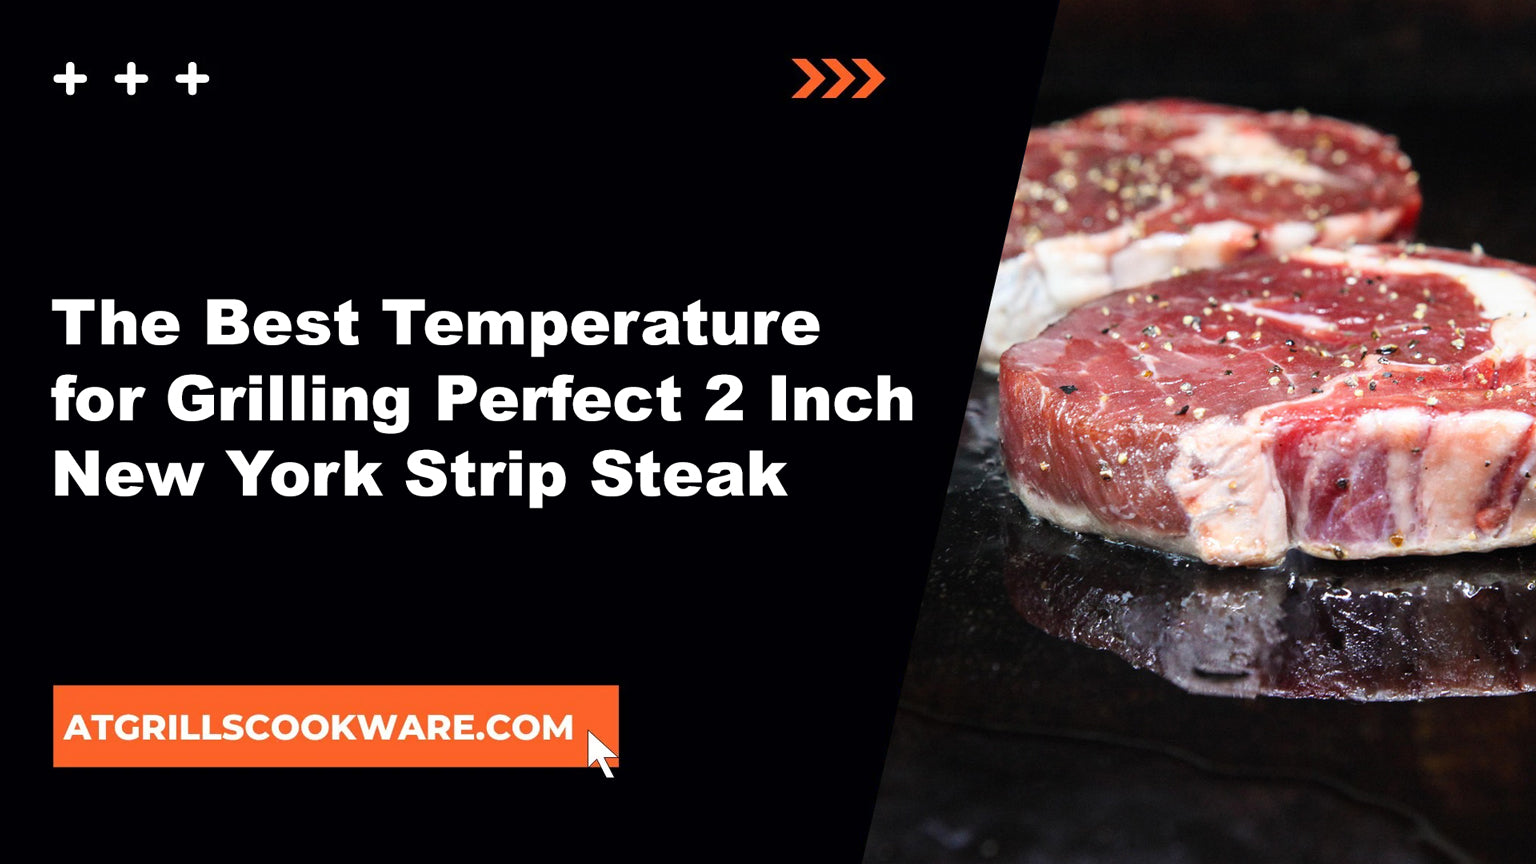 The Perfect Temperature for Grilling a Mouthwatering 2 Inch New York Strip Steak